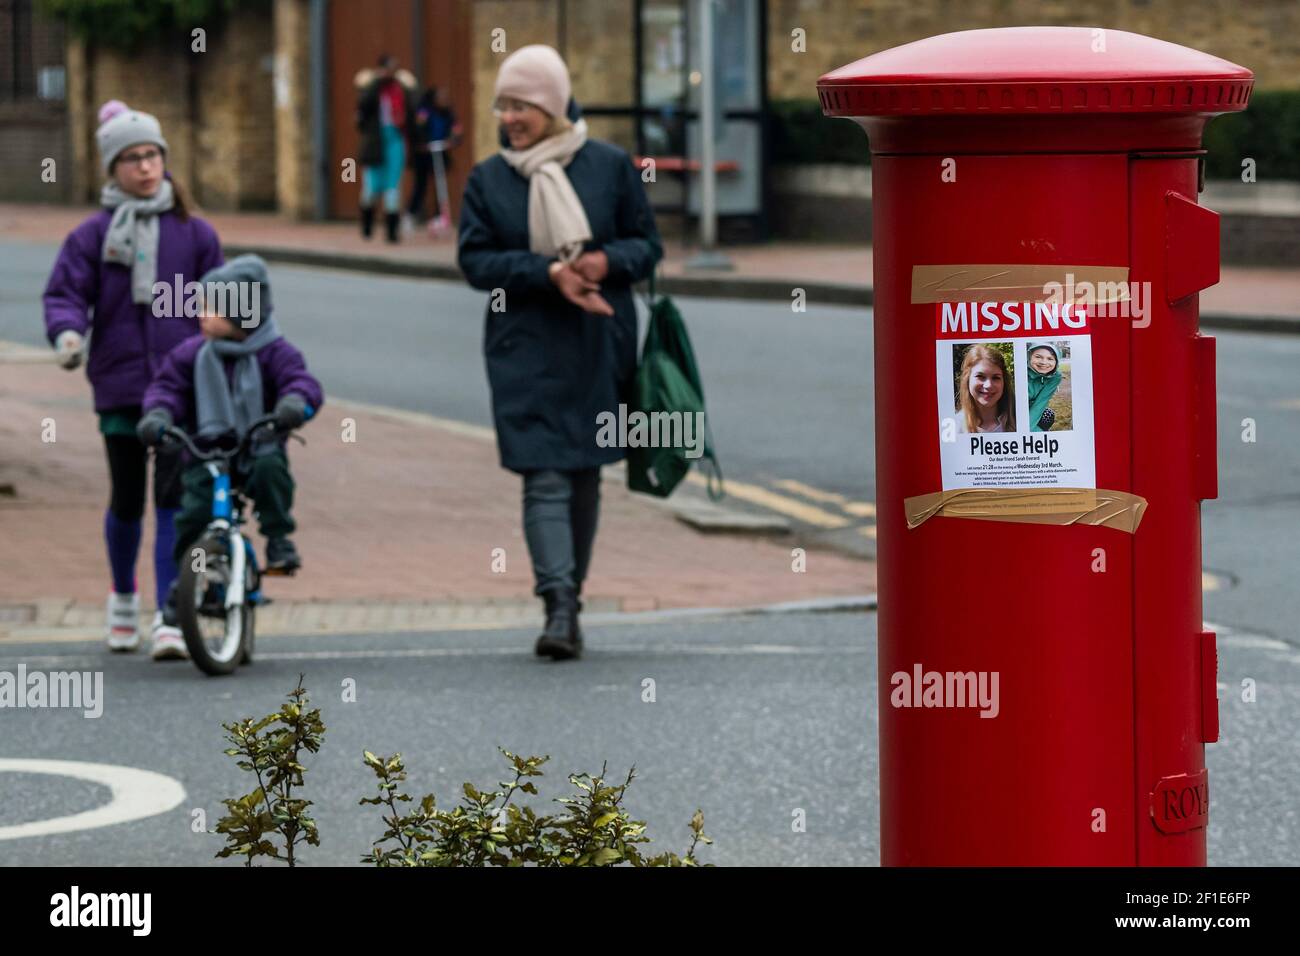 London, UK. 8th Mar, 2021. Missing signs (asking for any information), near Clapham Common, for Sarah Everard, who disappeared after 9:28 on March 3 somewhere between Clapham Junction and Brixton Credit: Guy Bell/Alamy Live News Stock Photo